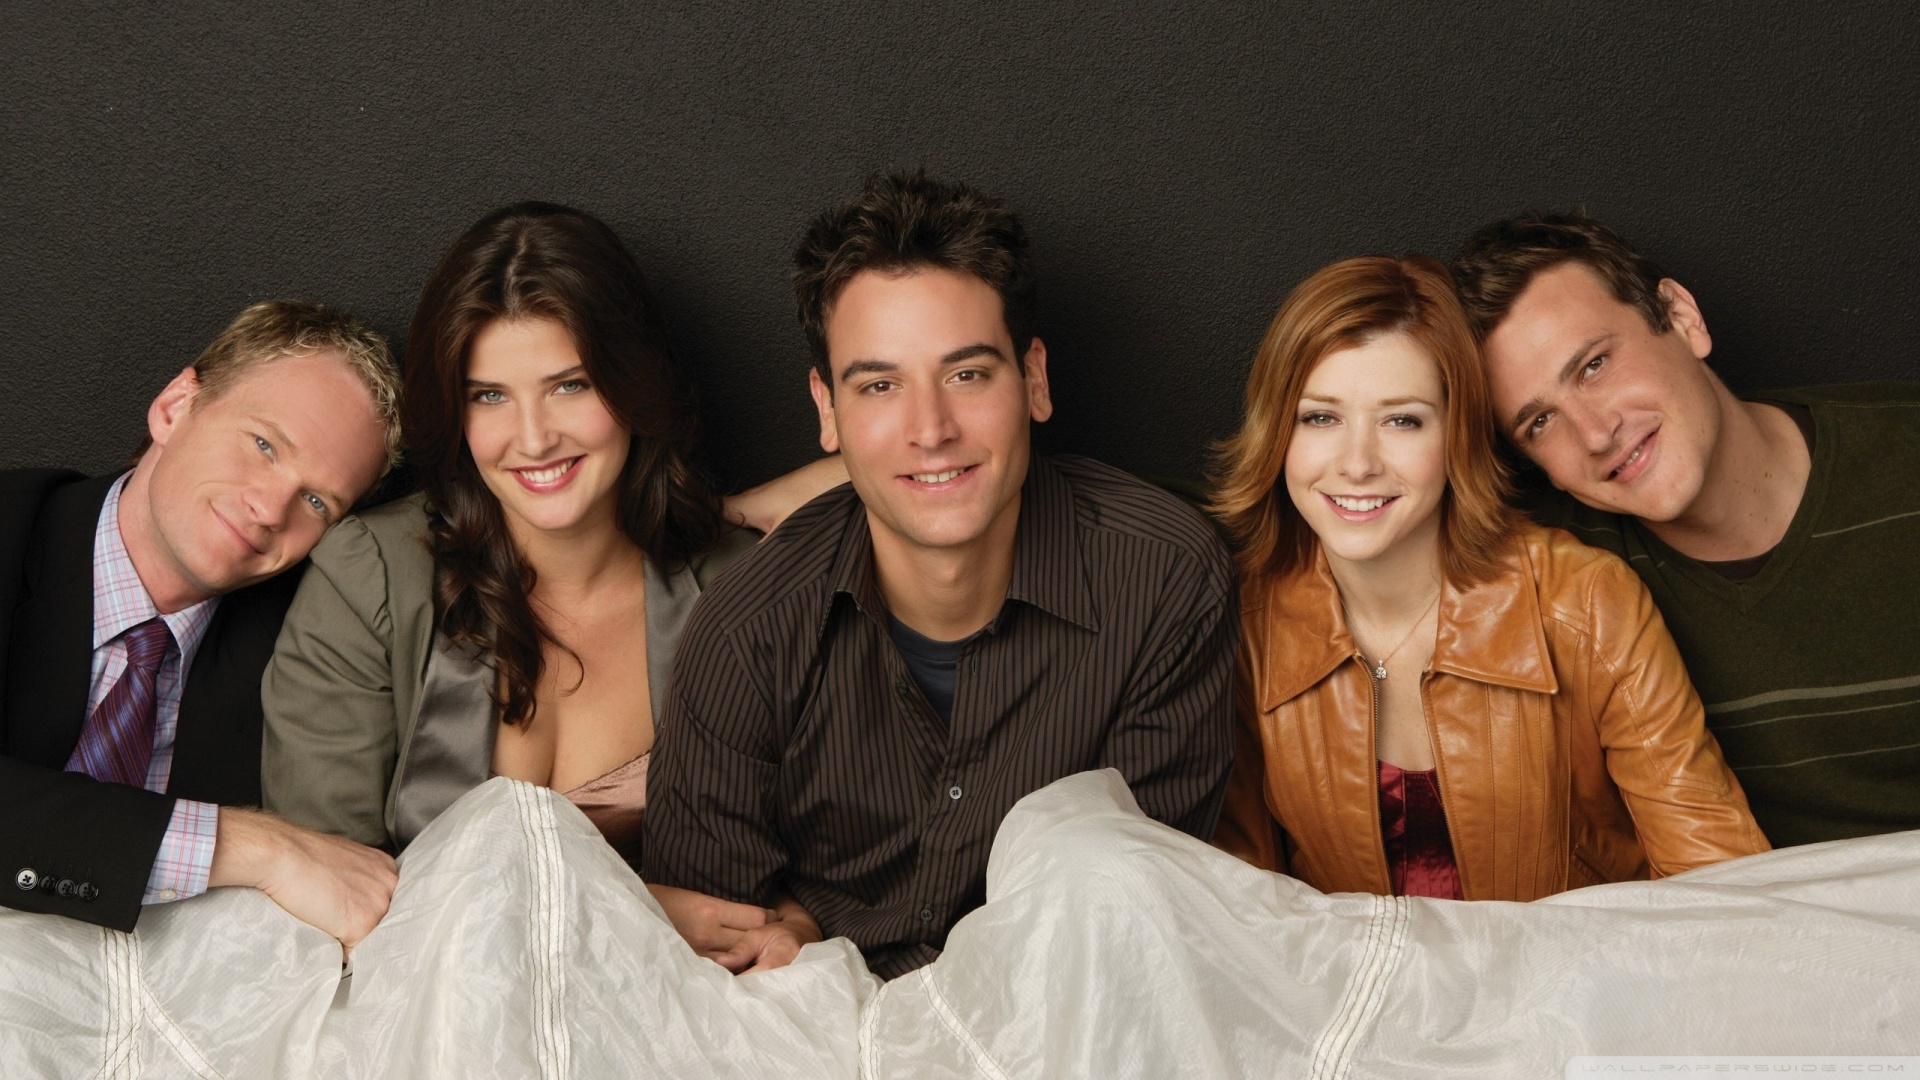 how i met your mother wallpapers,people,social group,fun,youth,friendship